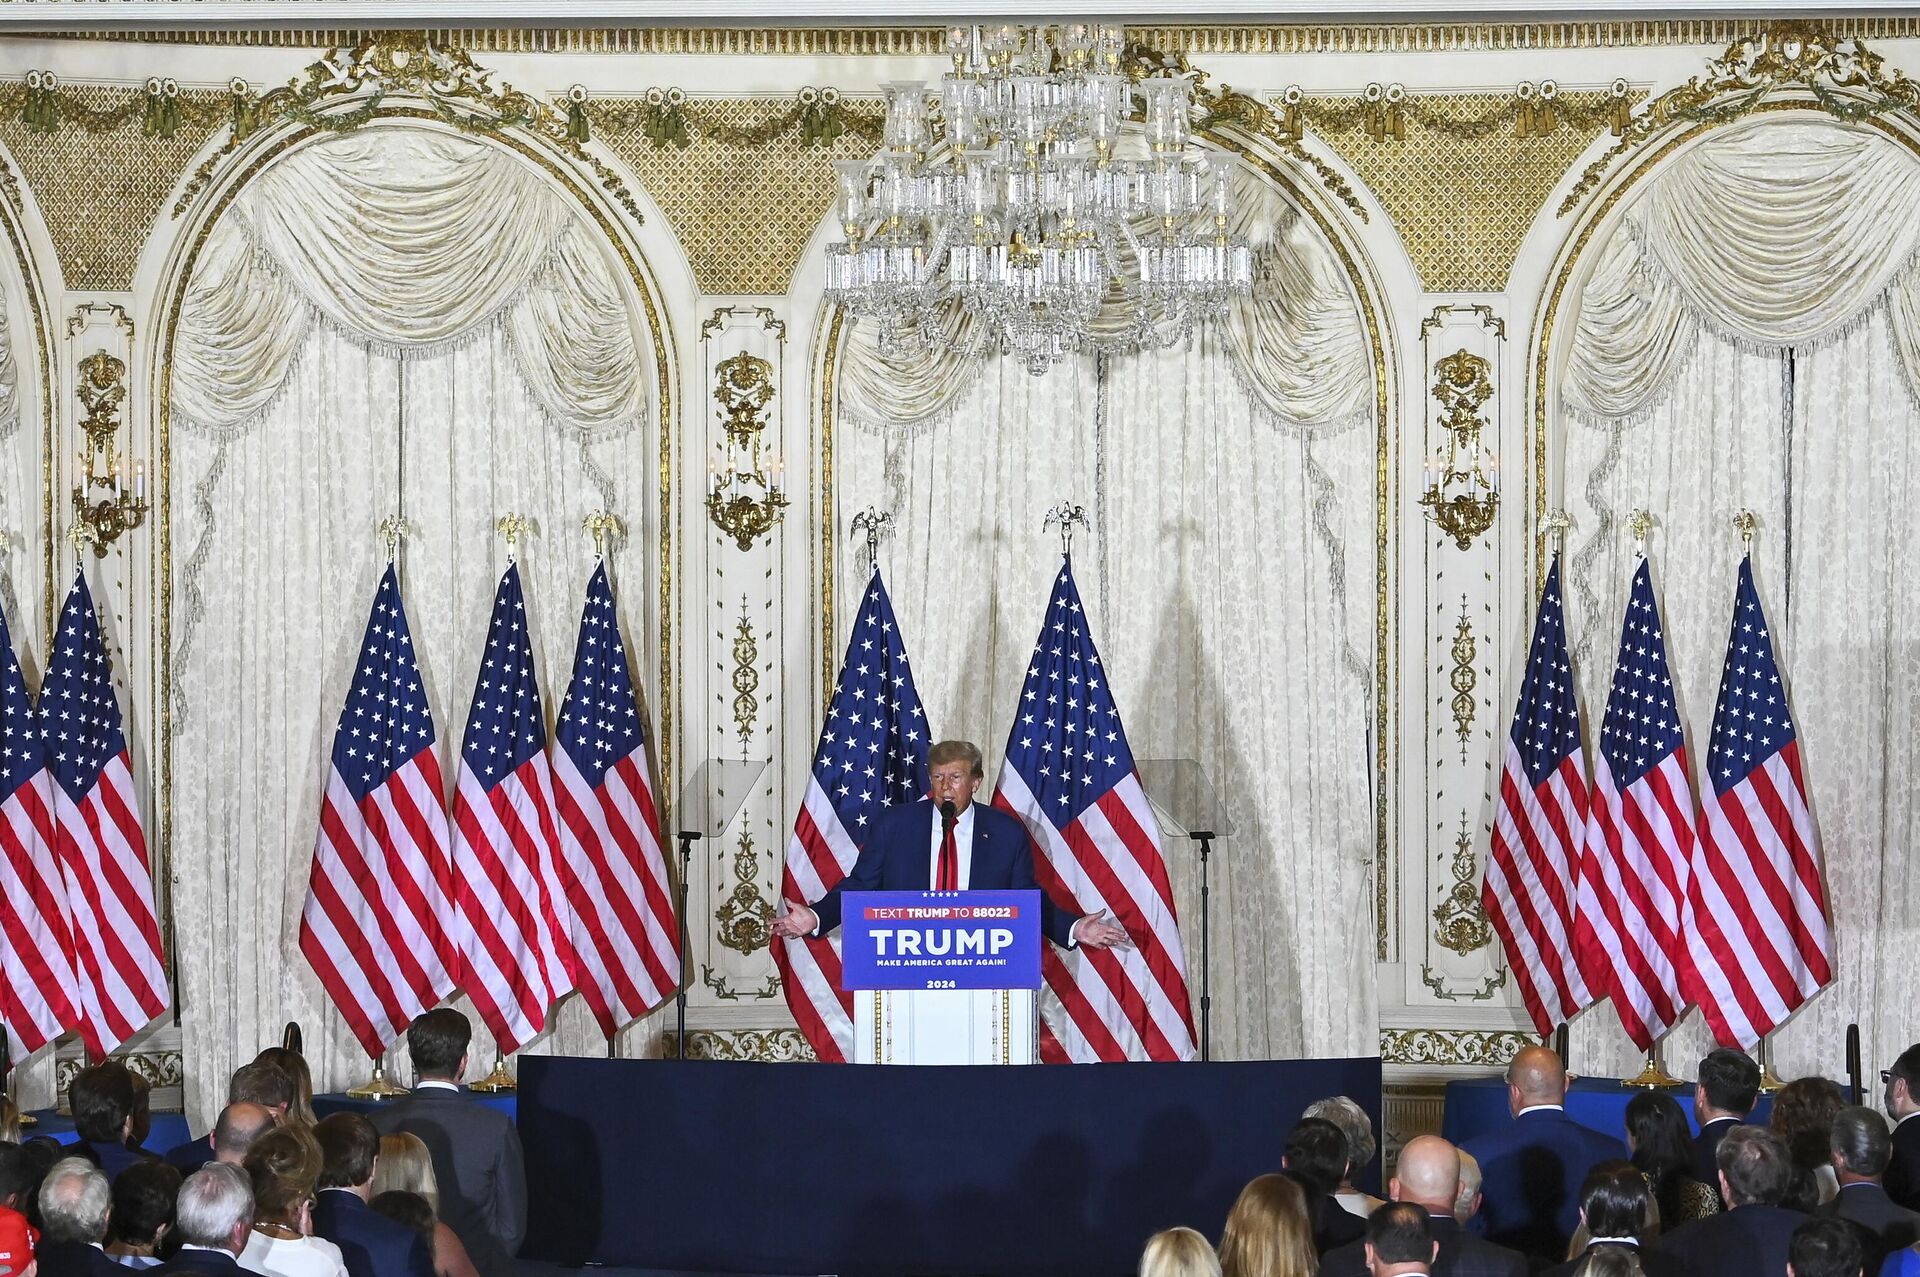 Former US president Donald Trump speaks during a press conference following his court appearance over an alleged 'hush-money' payment, at his Mar-a-Lago estate in Palm Beach, Florida, on April 4, 2023. - Sputnik International, 1920, 05.04.2023